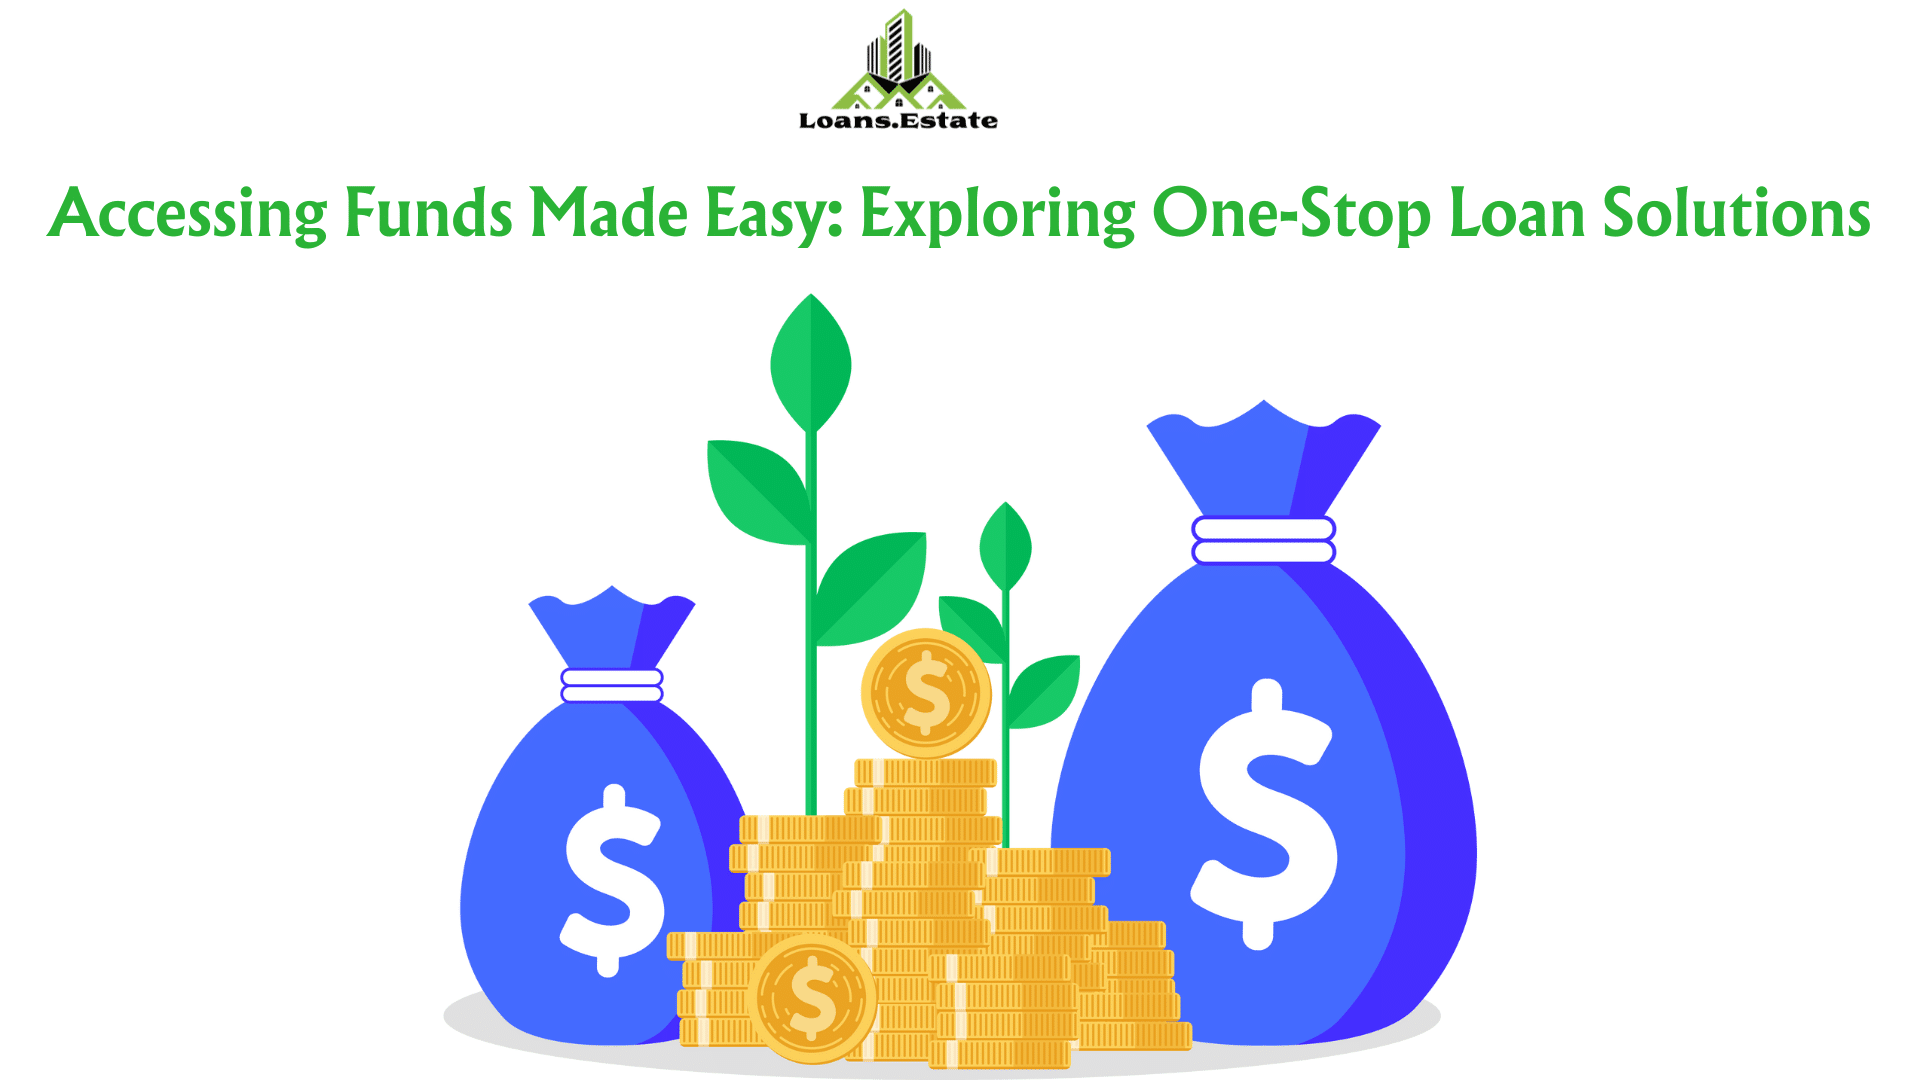 Accessing Funds Made Easy: Exploring One-Stop Loan Solutions